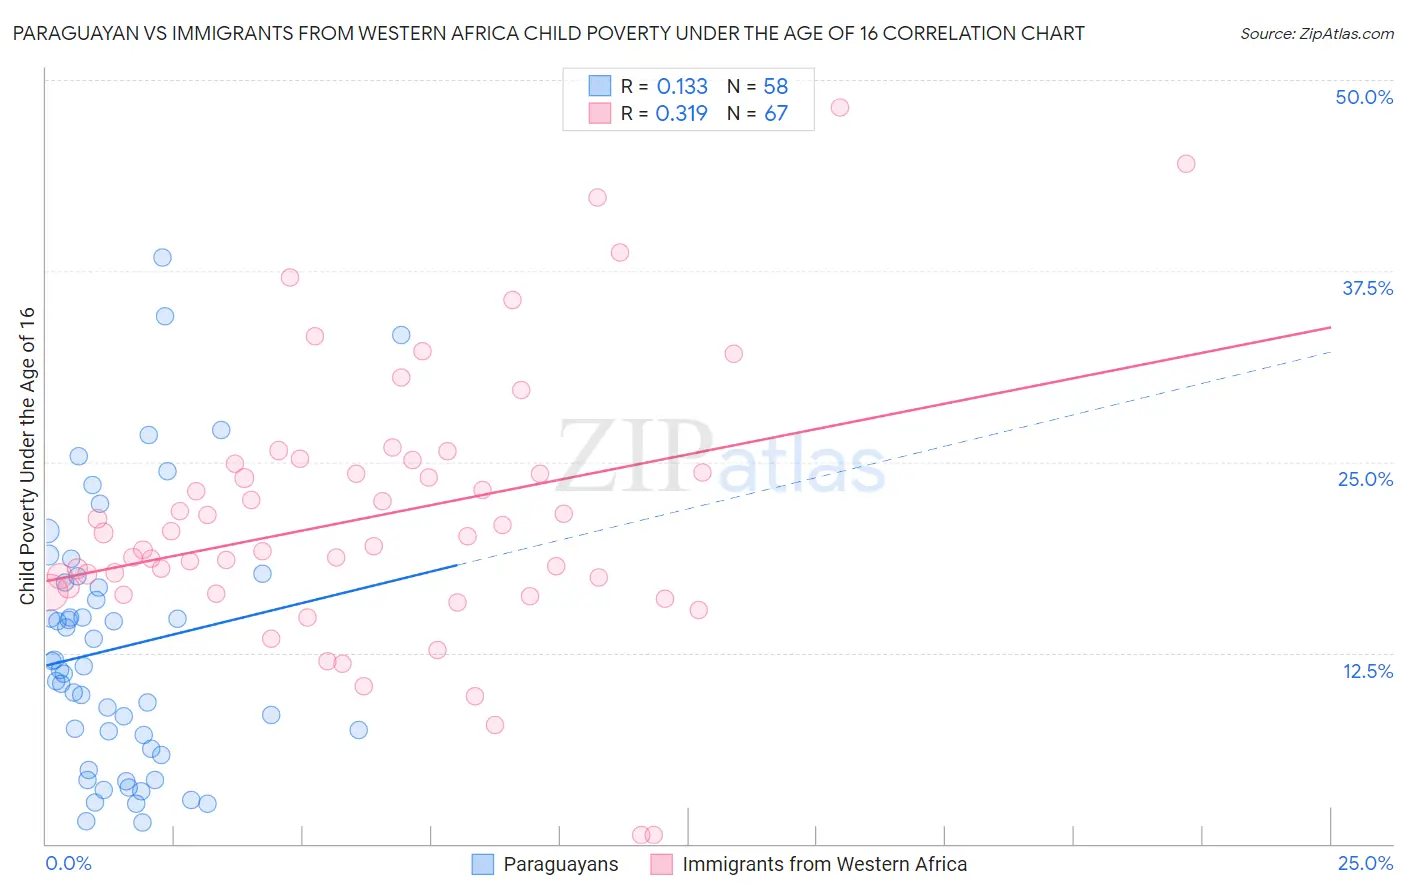 Paraguayan vs Immigrants from Western Africa Child Poverty Under the Age of 16